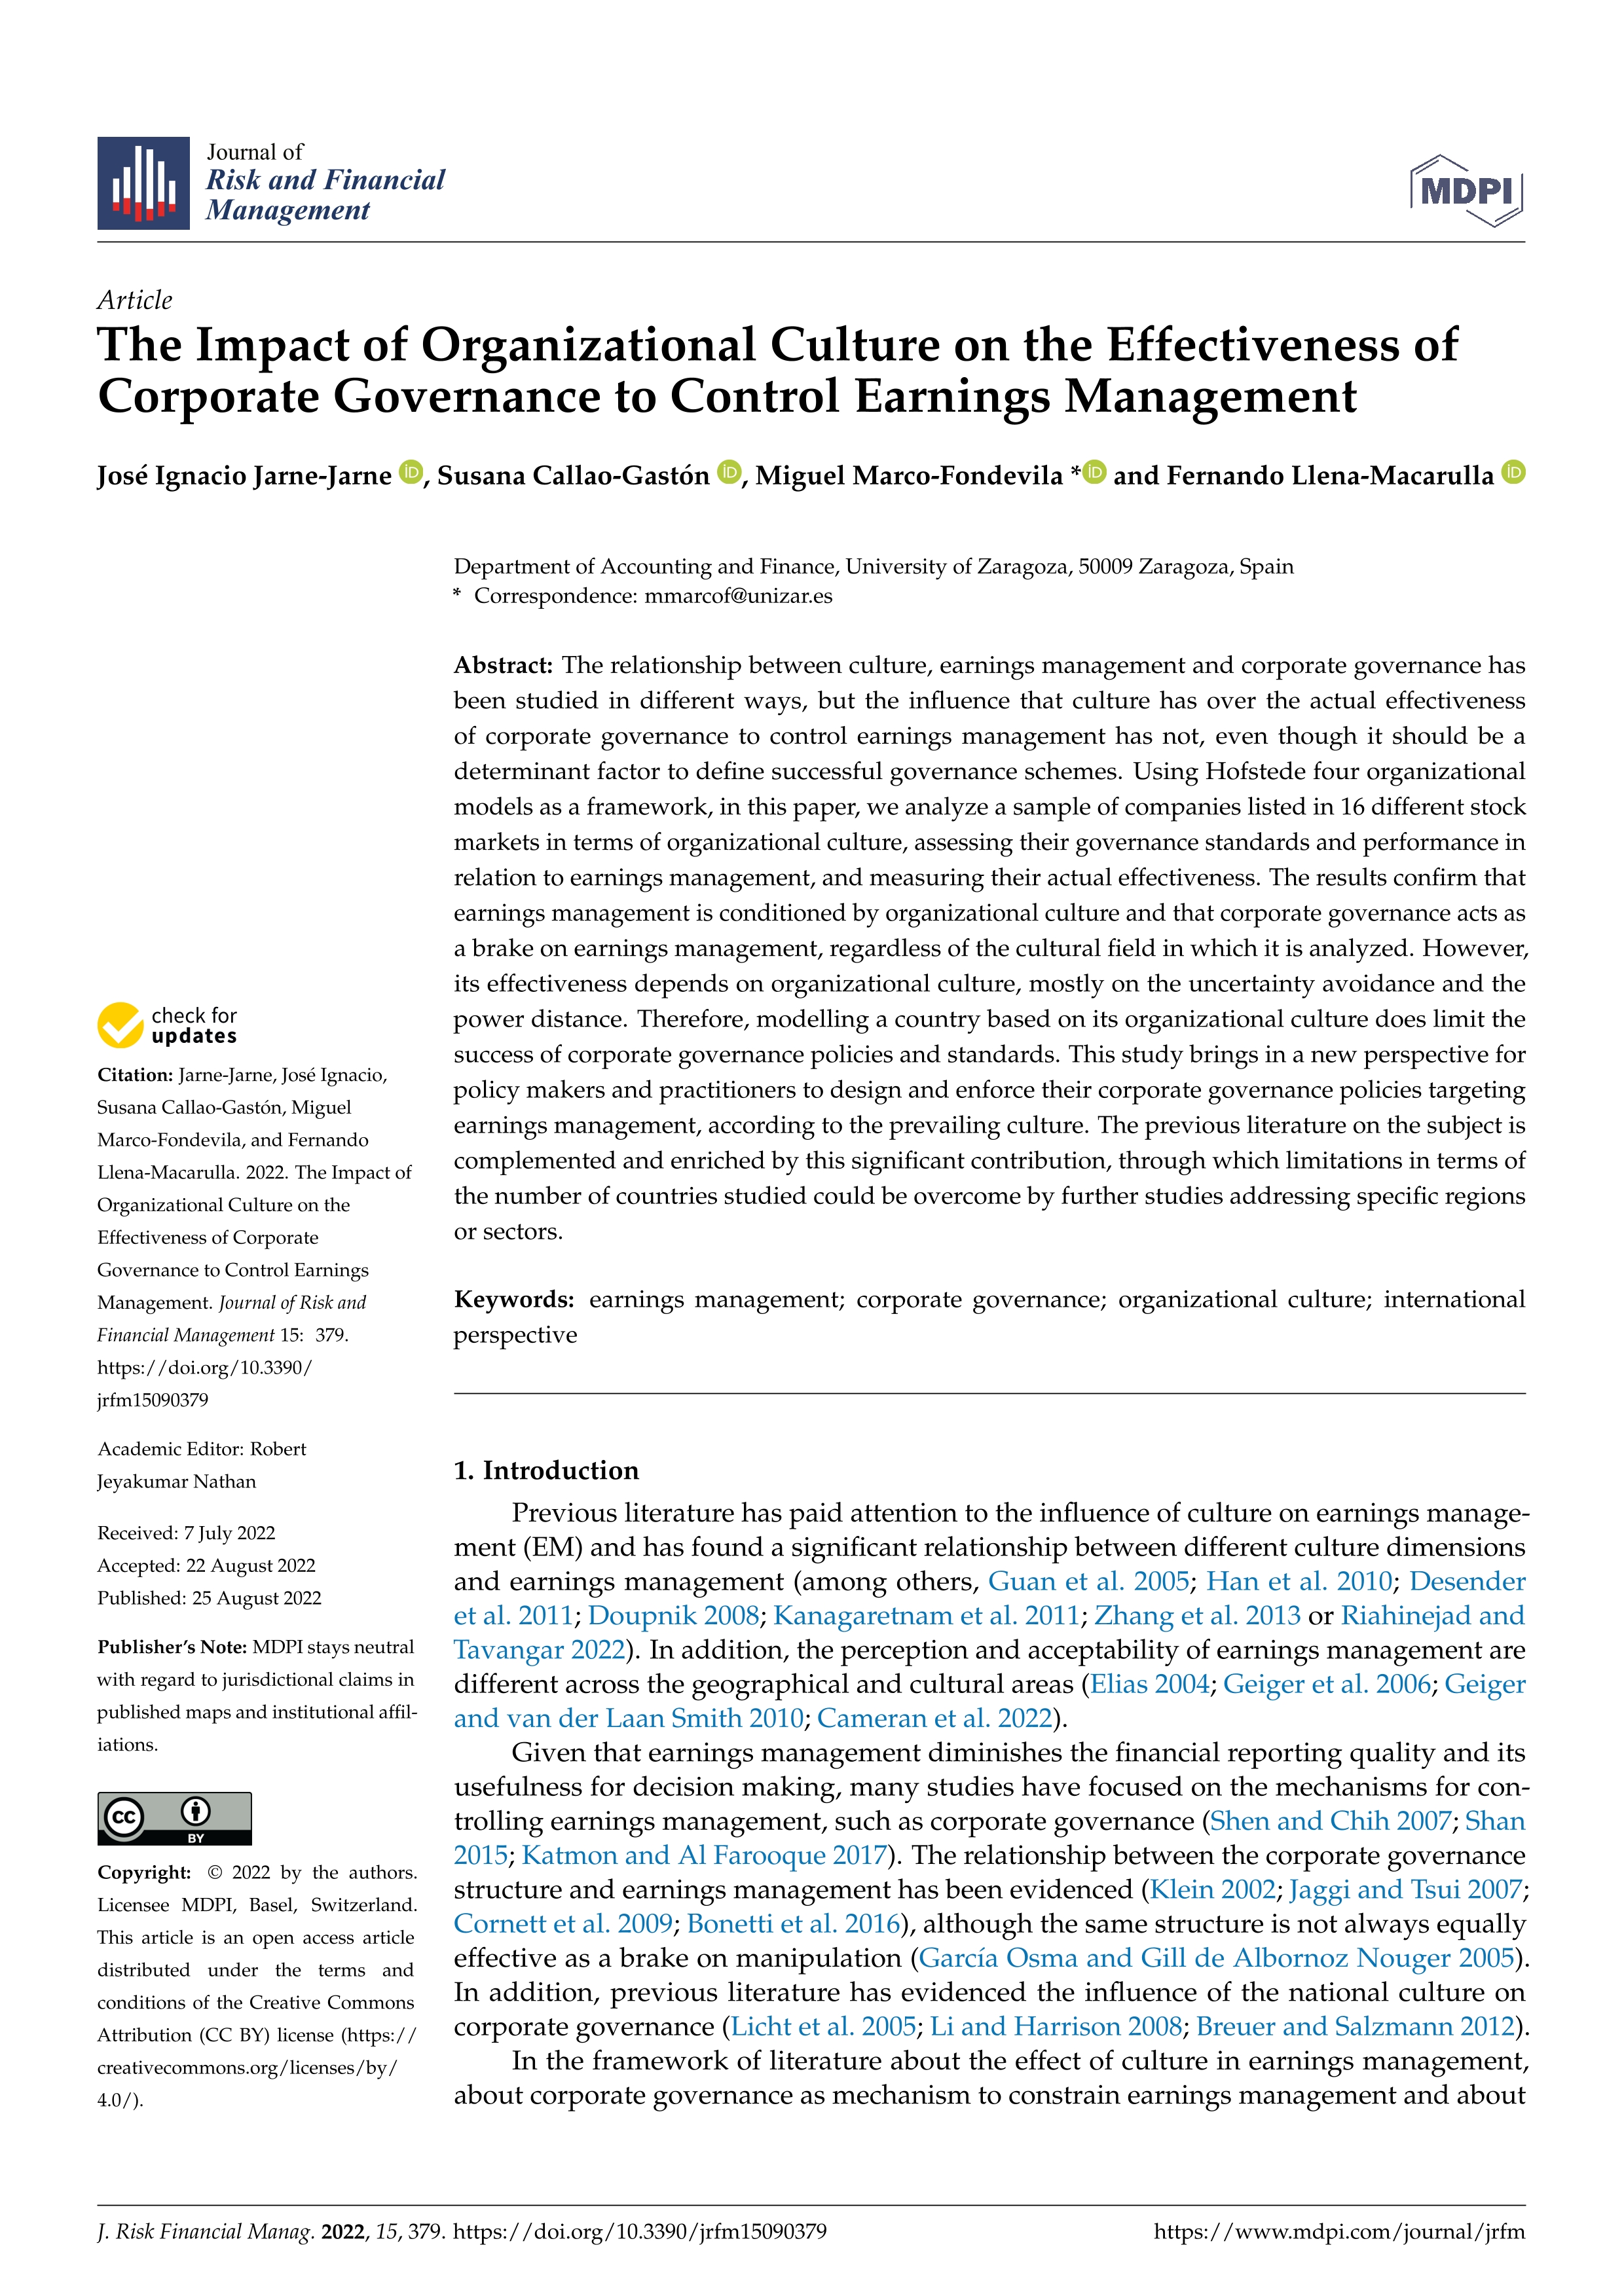 The Impact of Organizational Culture on the Effectiveness of Corporate Governance to Control Earnings Management